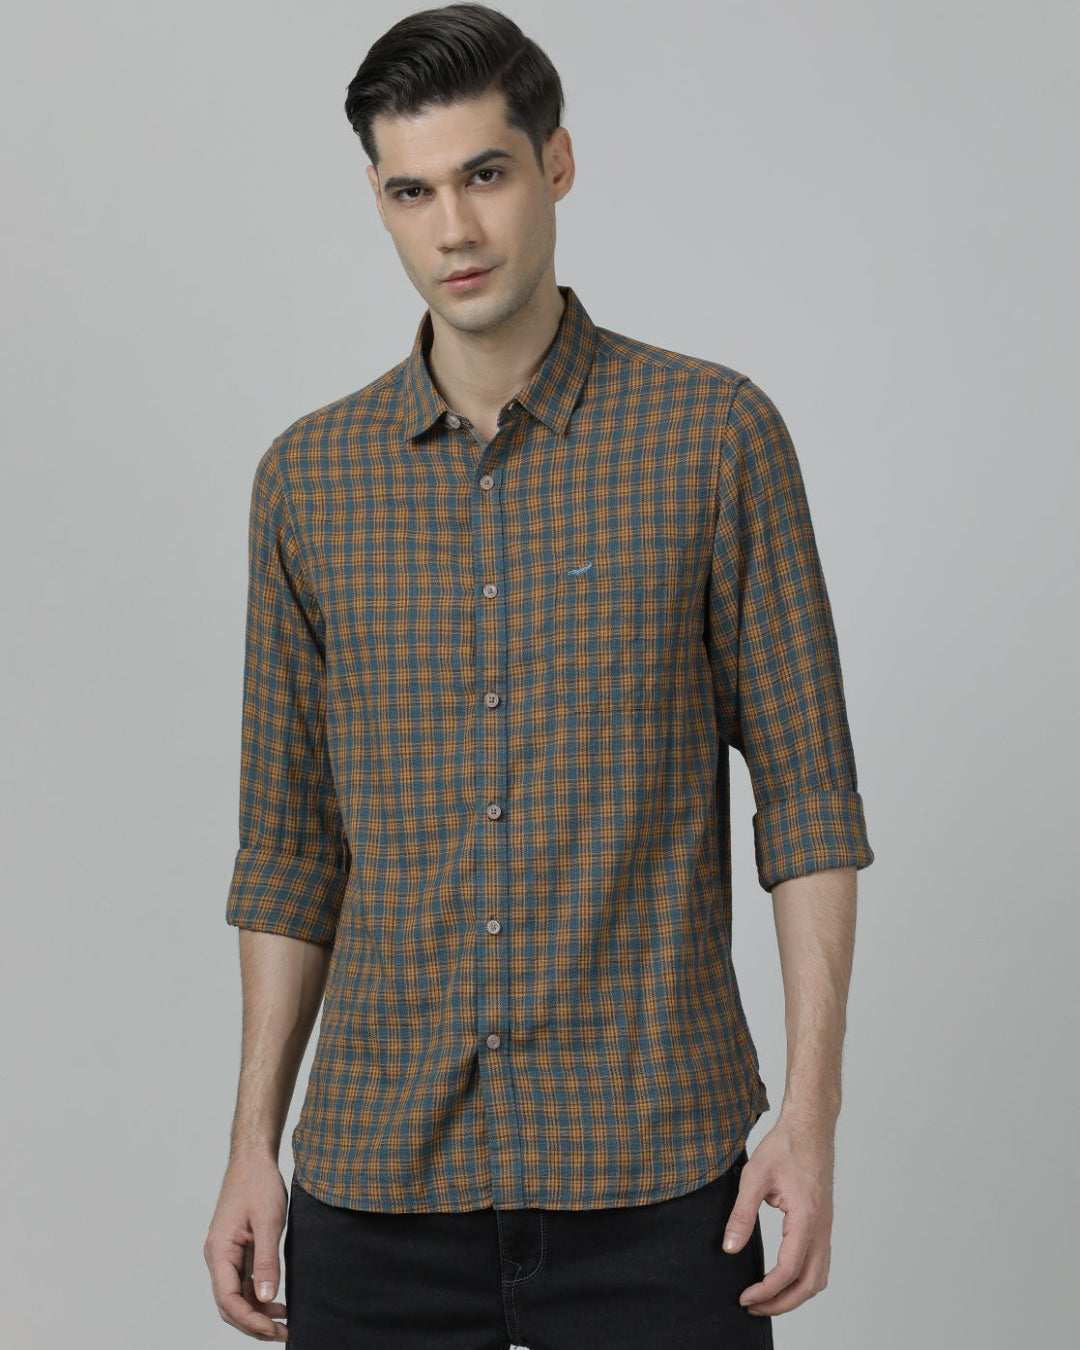 Casual Checks Comfort Fit Full Sleeve Brown / Teal Shirt with Collar